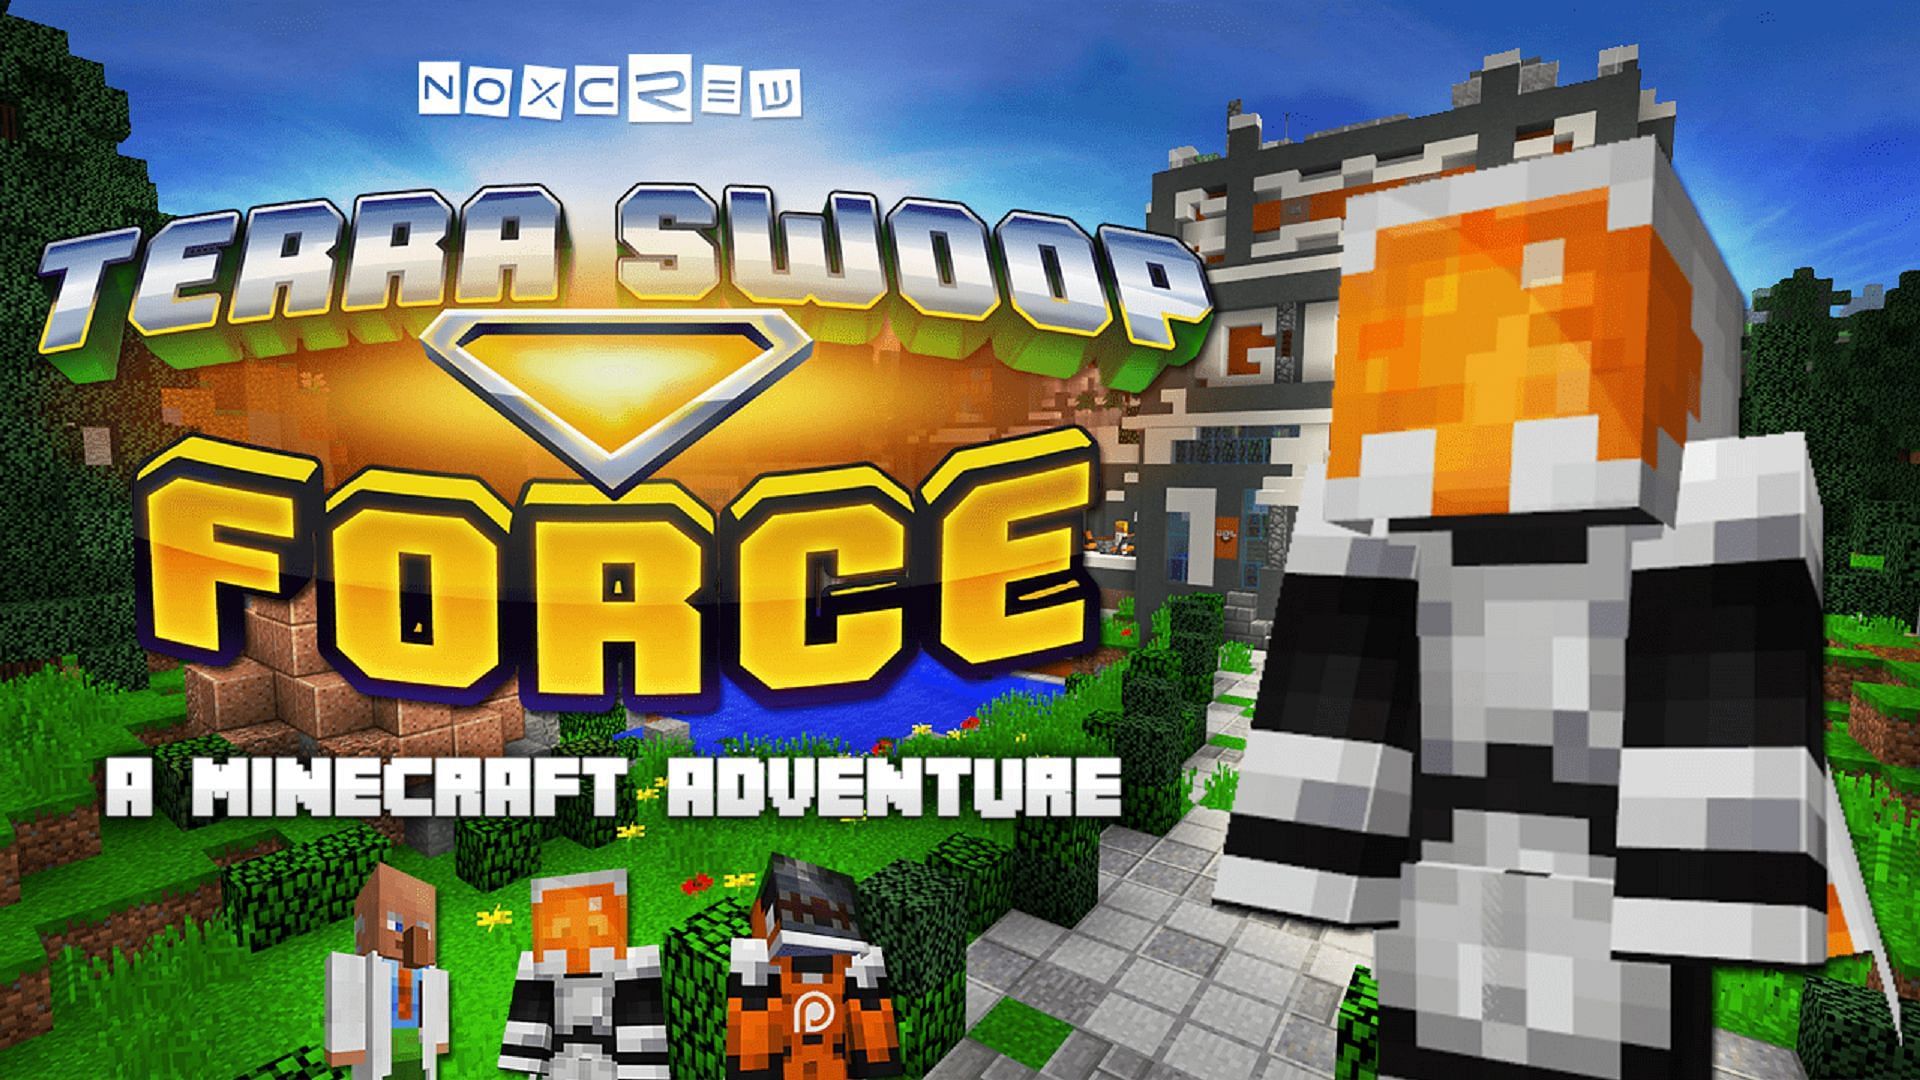 Terra Swoop Force will challenge players while also providing an interesting backstory (Image via Noxcrew/Minecraft Maps)